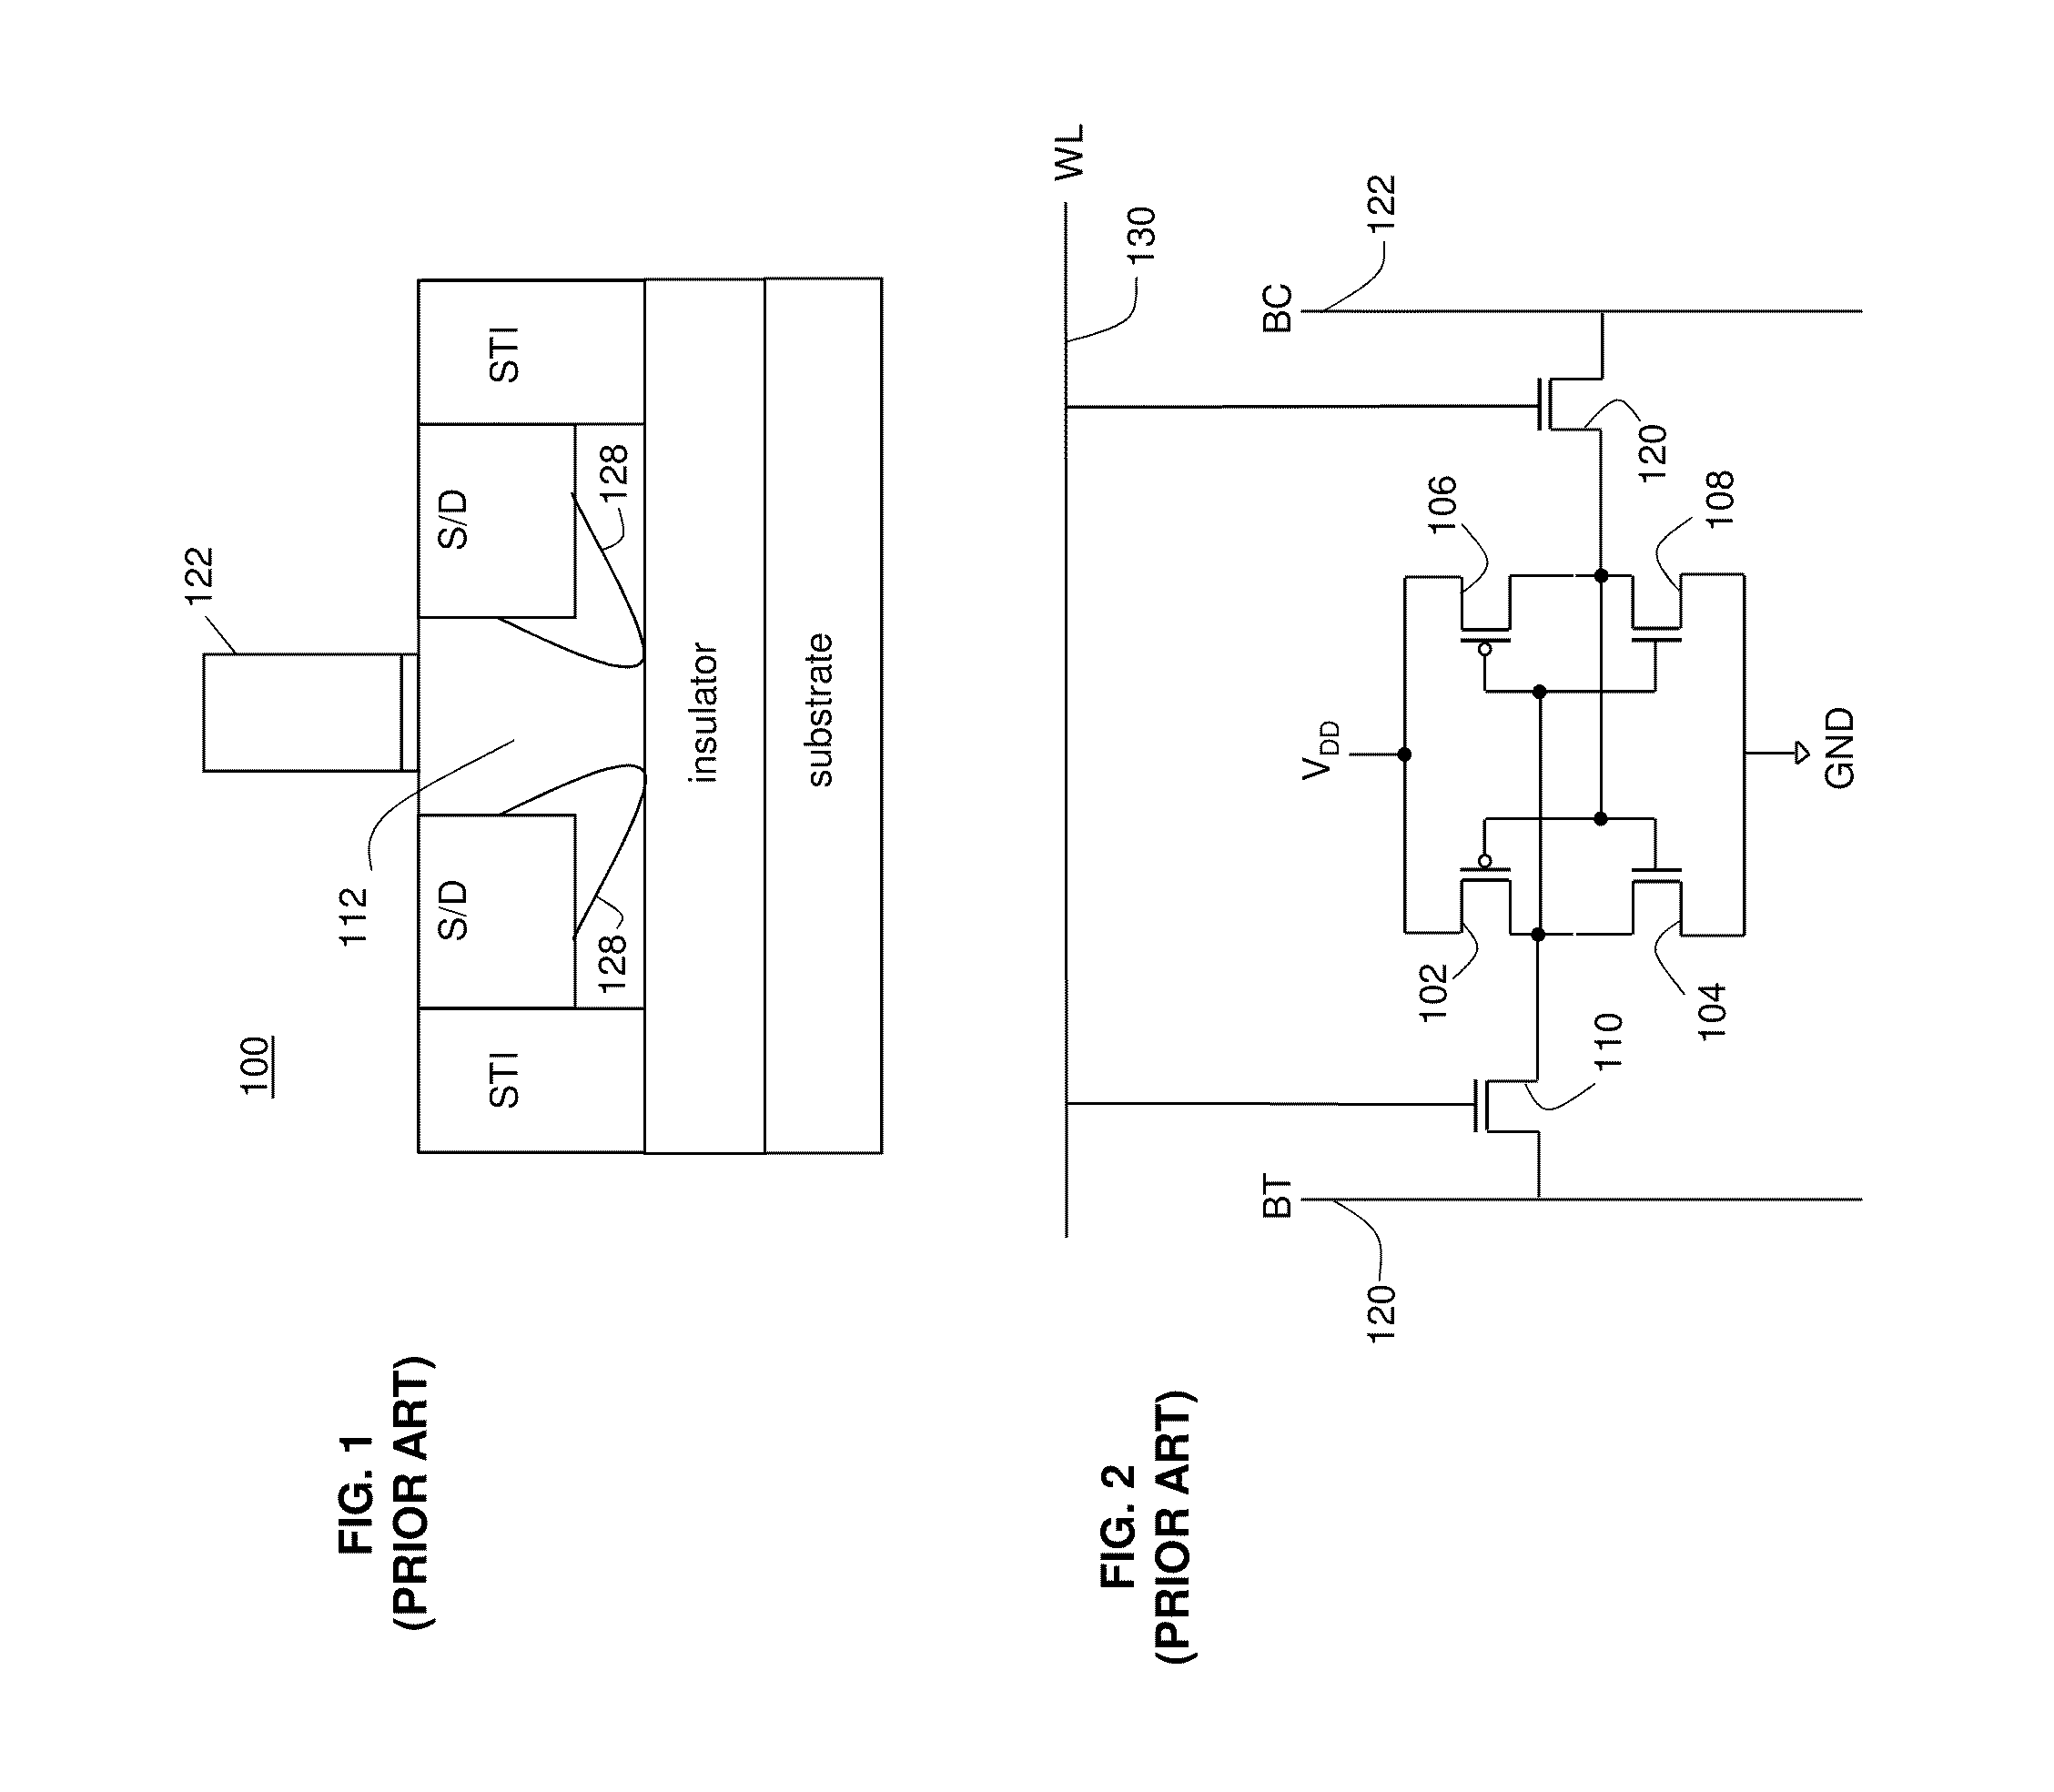 High density butted junction CMOS inverter,  and making and layout of same